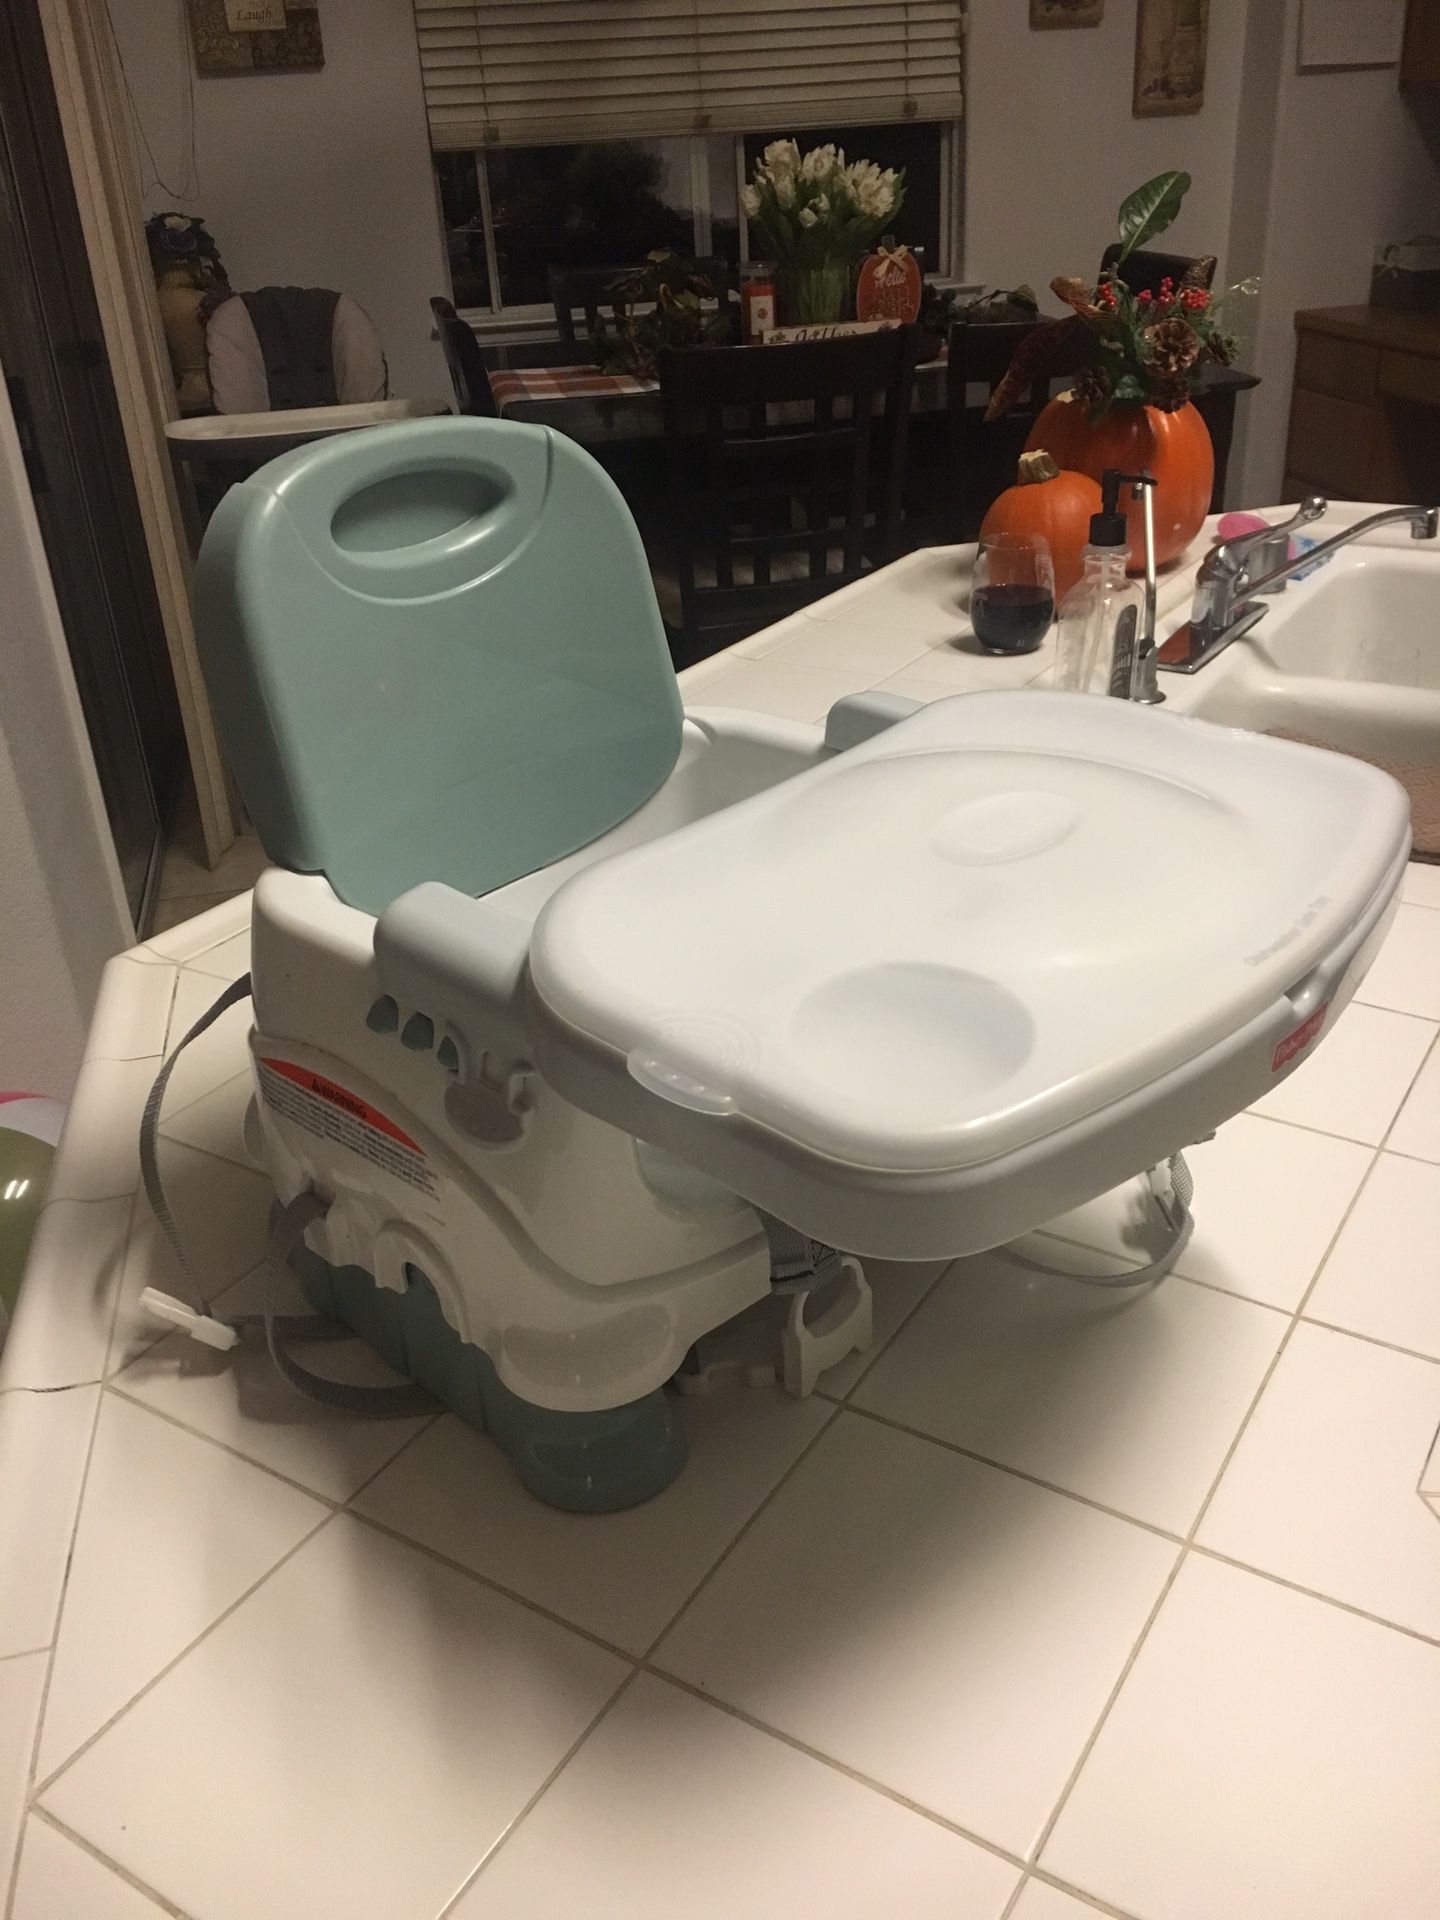 Fisher Price Deluxe Booster Seat